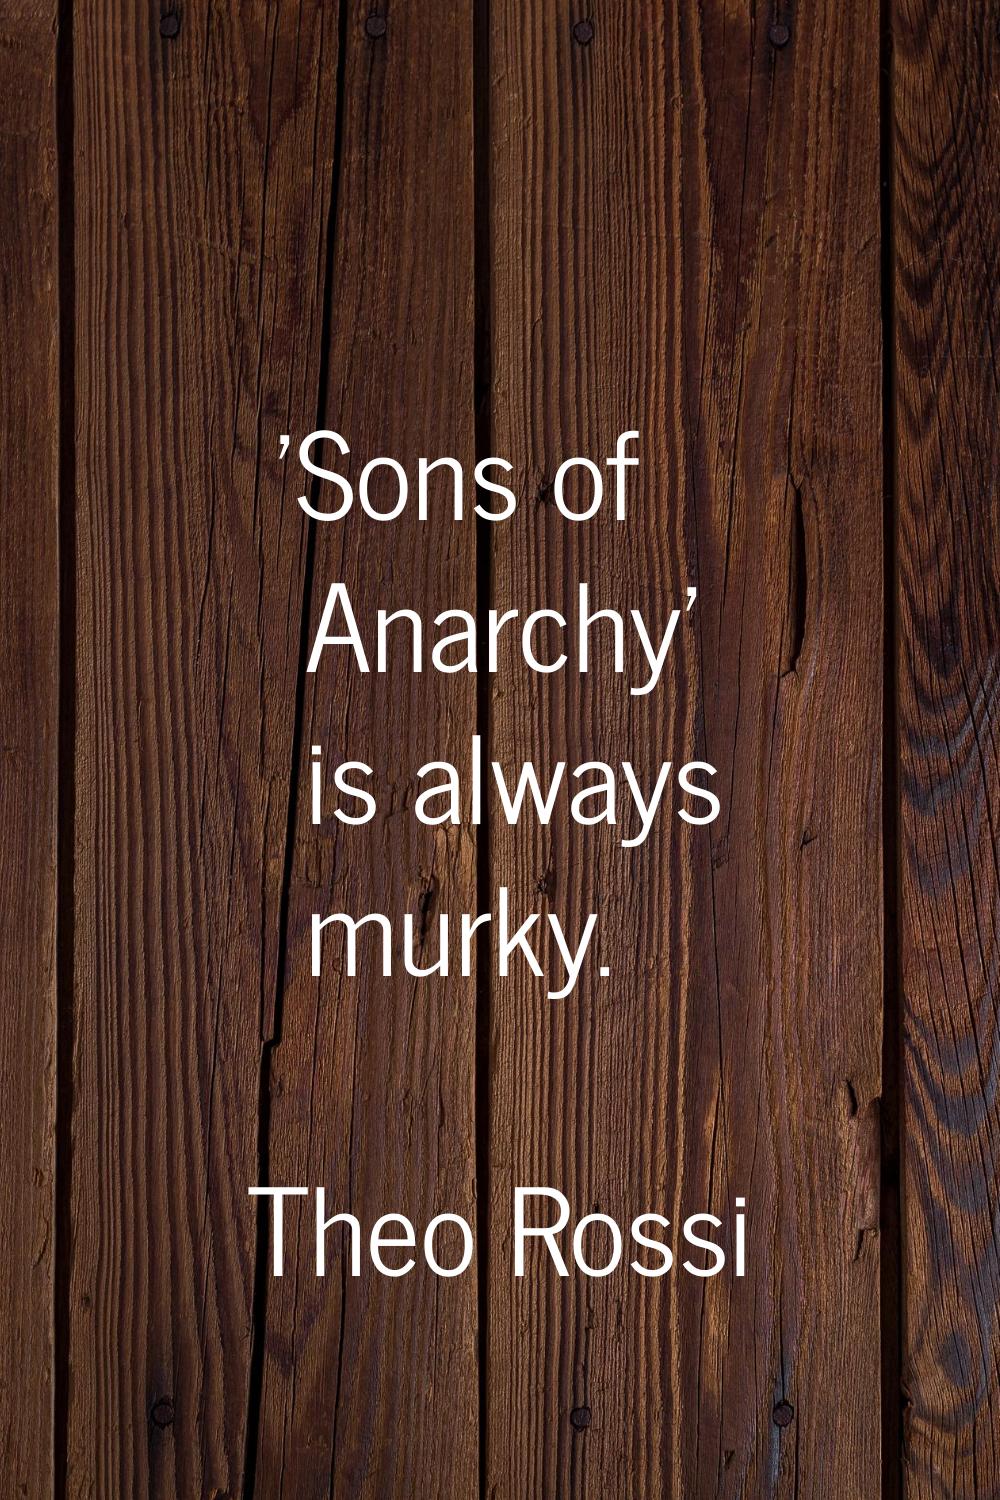 'Sons of Anarchy' is always murky.